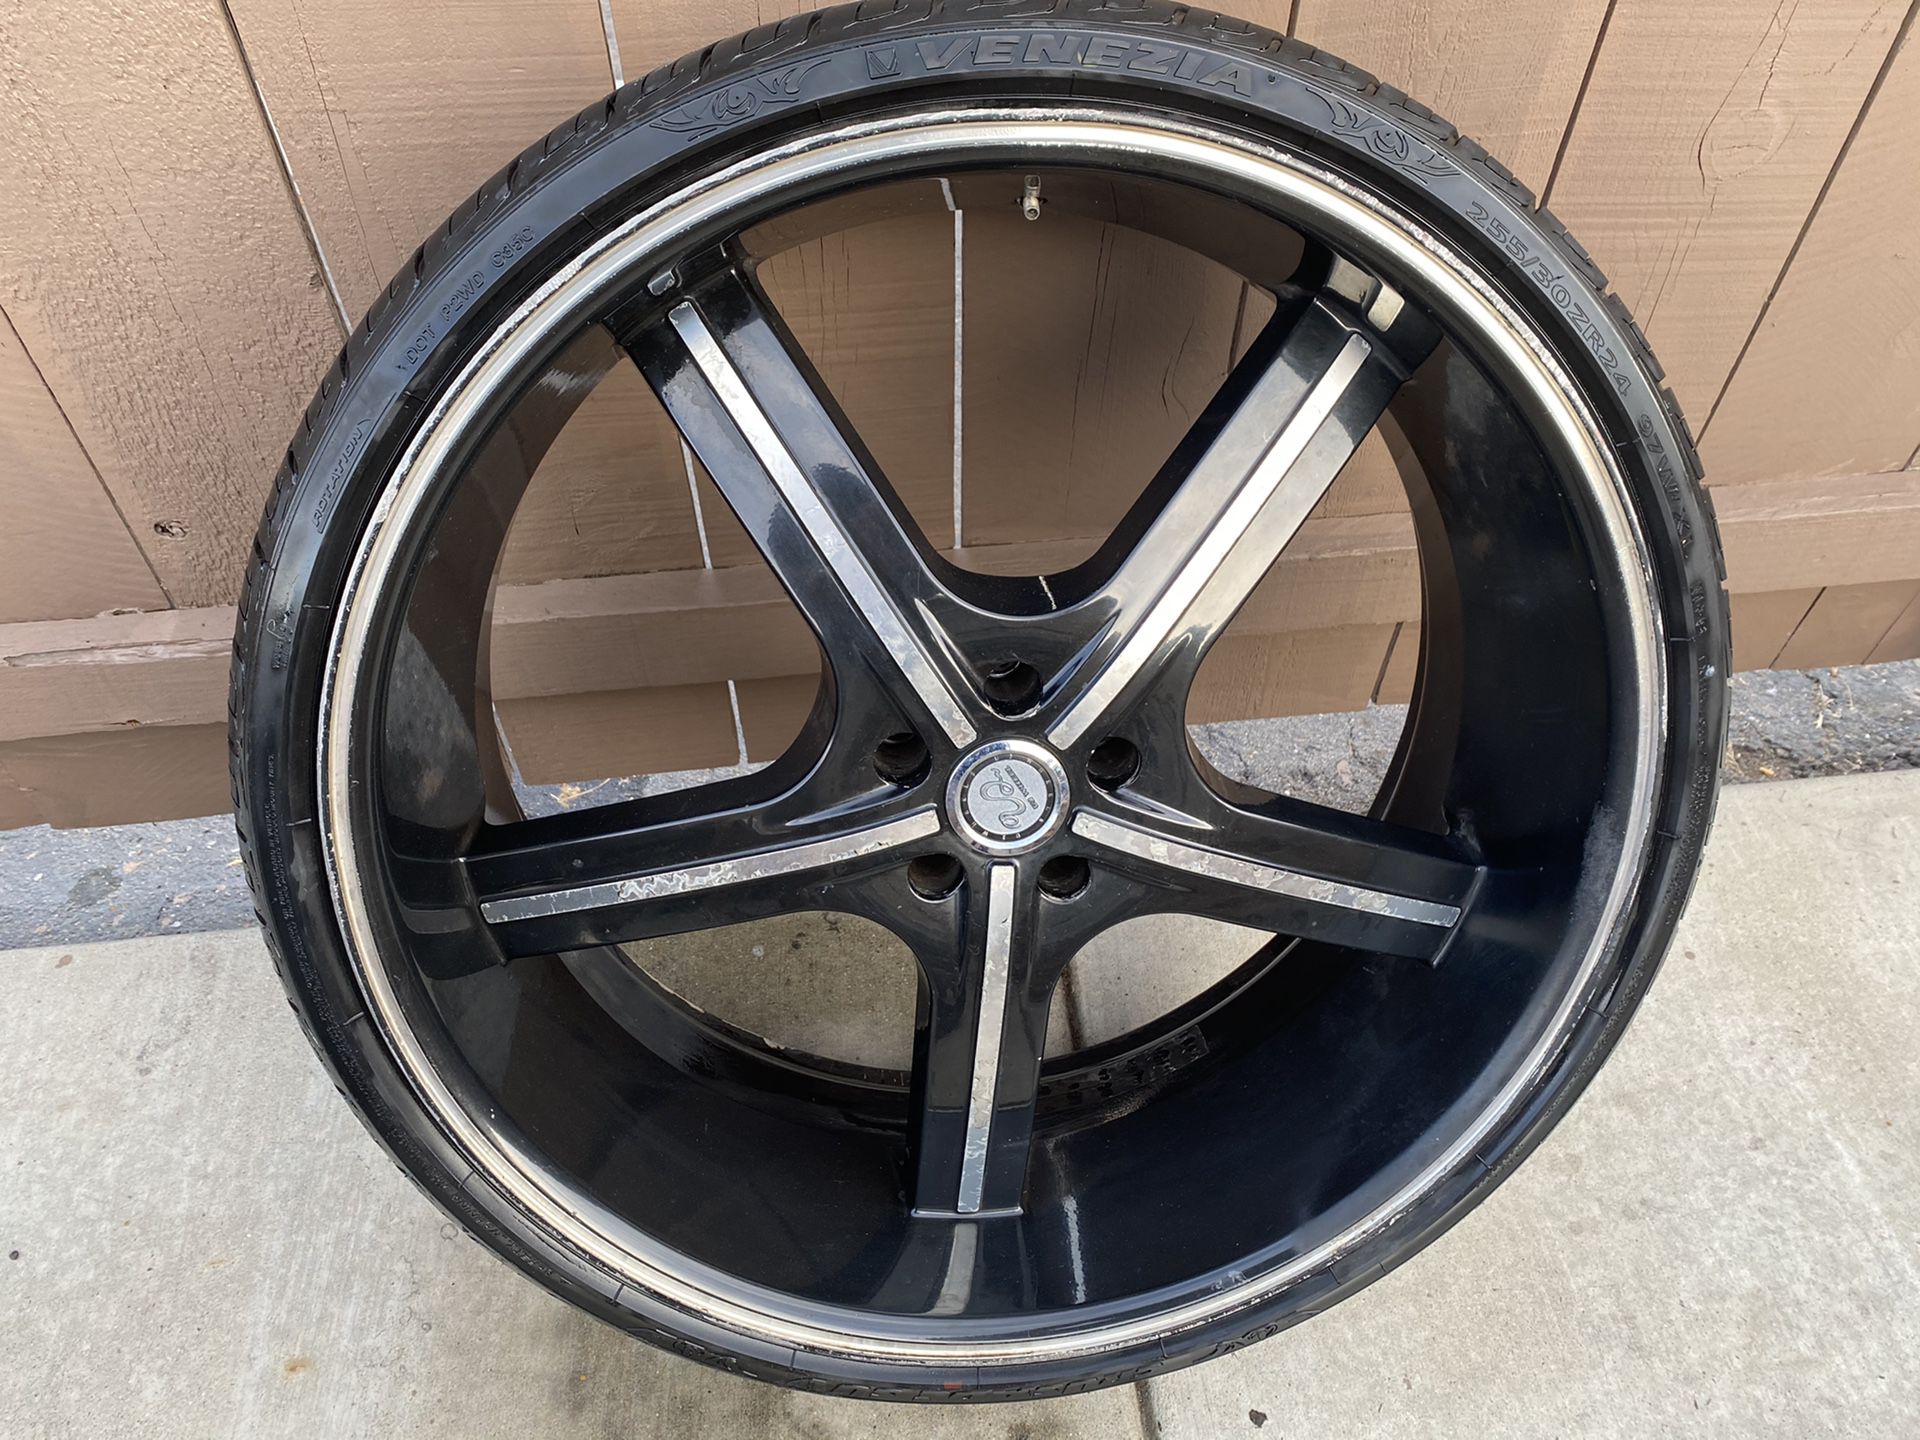 24 inch rims with used tires